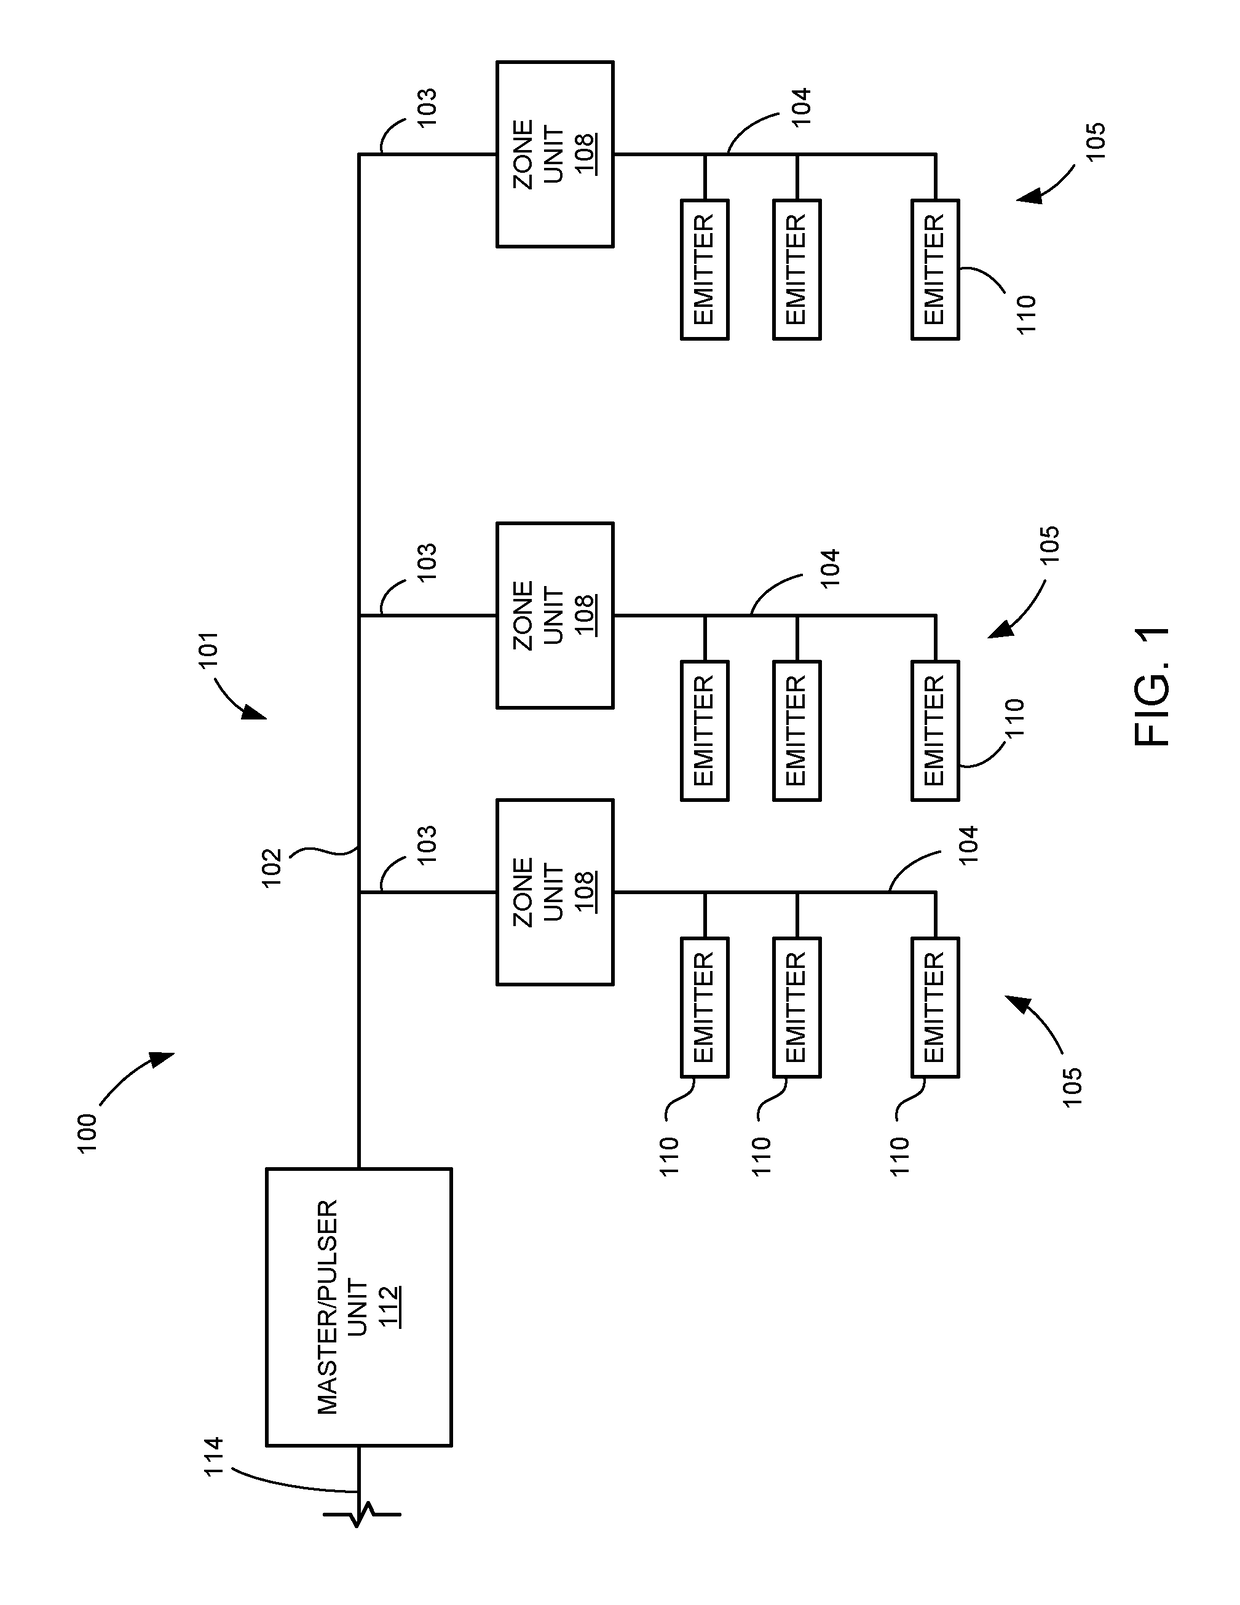 Apparatus and Methods for Wireless Transmission of Alarm Condition Information from Zones in an Irrigation System